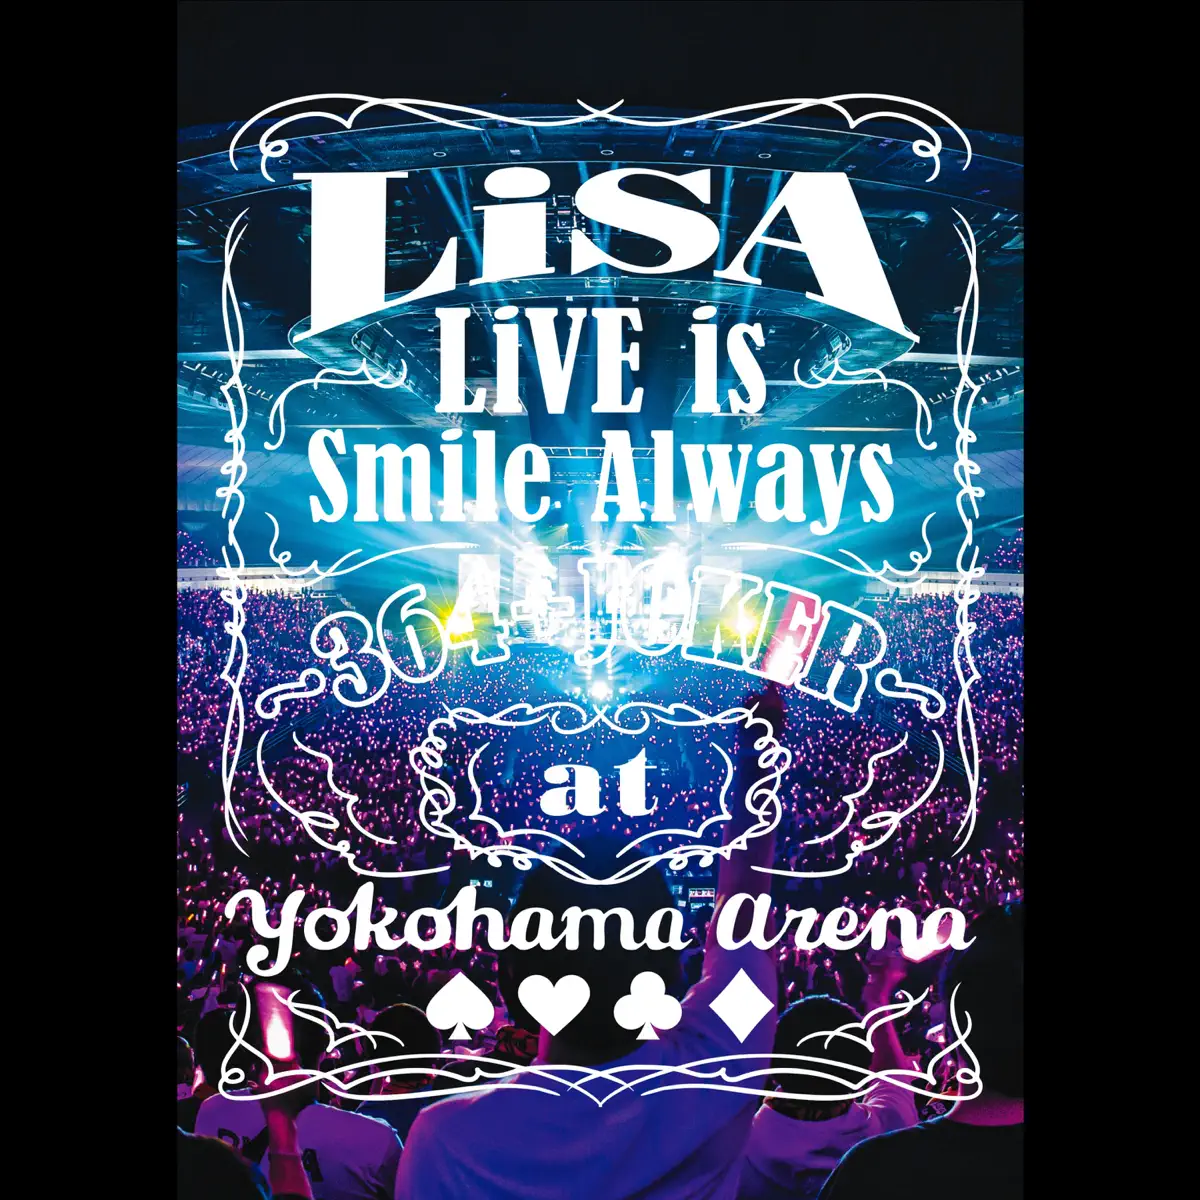 LiSA - LiVE is Smile Always～364+JOKER～ at 横浜アリーナ (2020) [iTunes Plus AAC M4A]-新房子